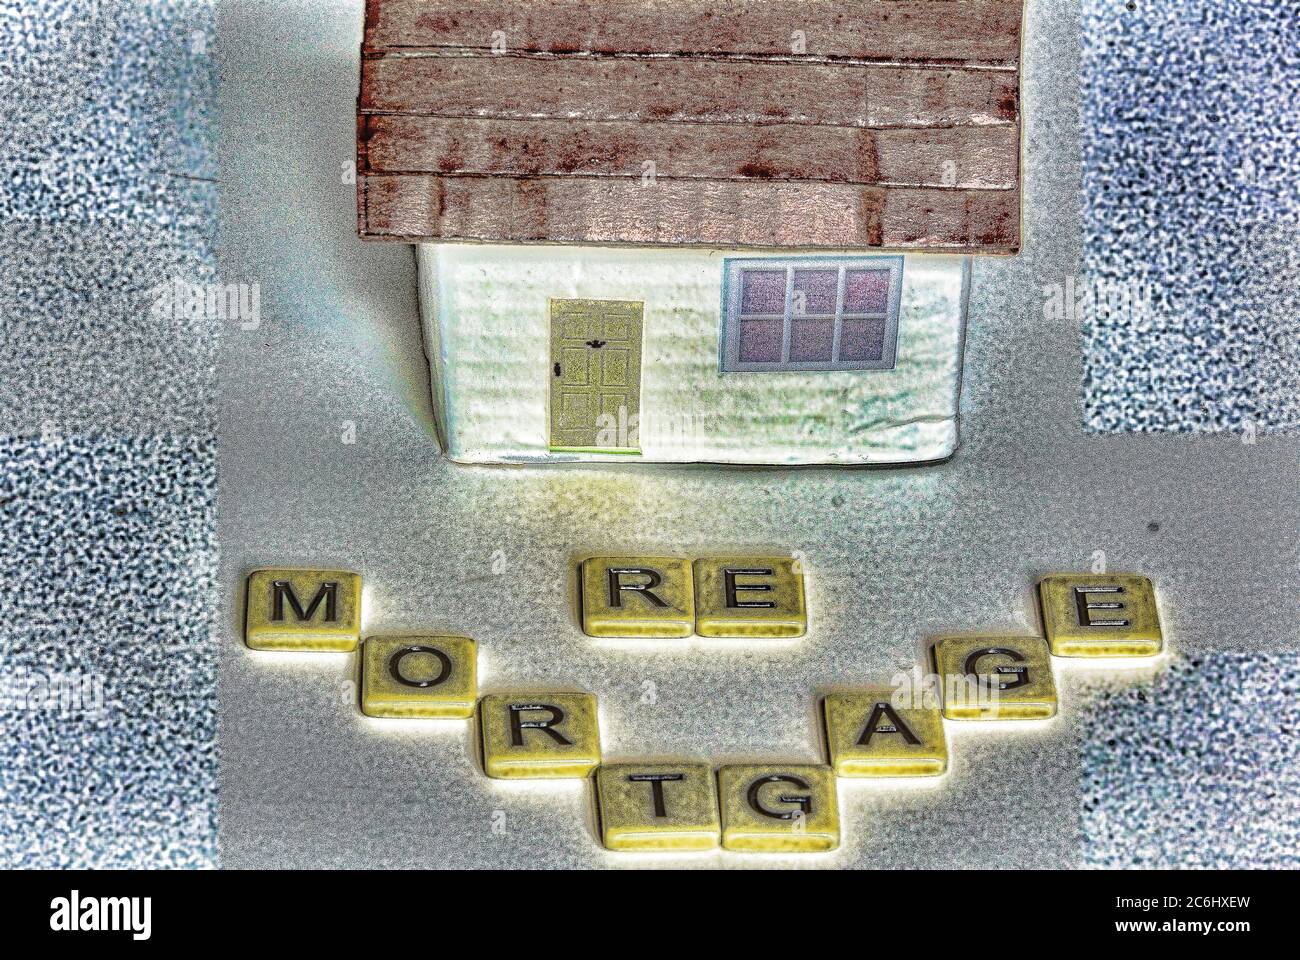 Financial concept image. Cost of  Covid 19 to economy and savings. need to re-mortgage, take money out of property to survive.  Words, 'Re, Mortgage', Stock Photo